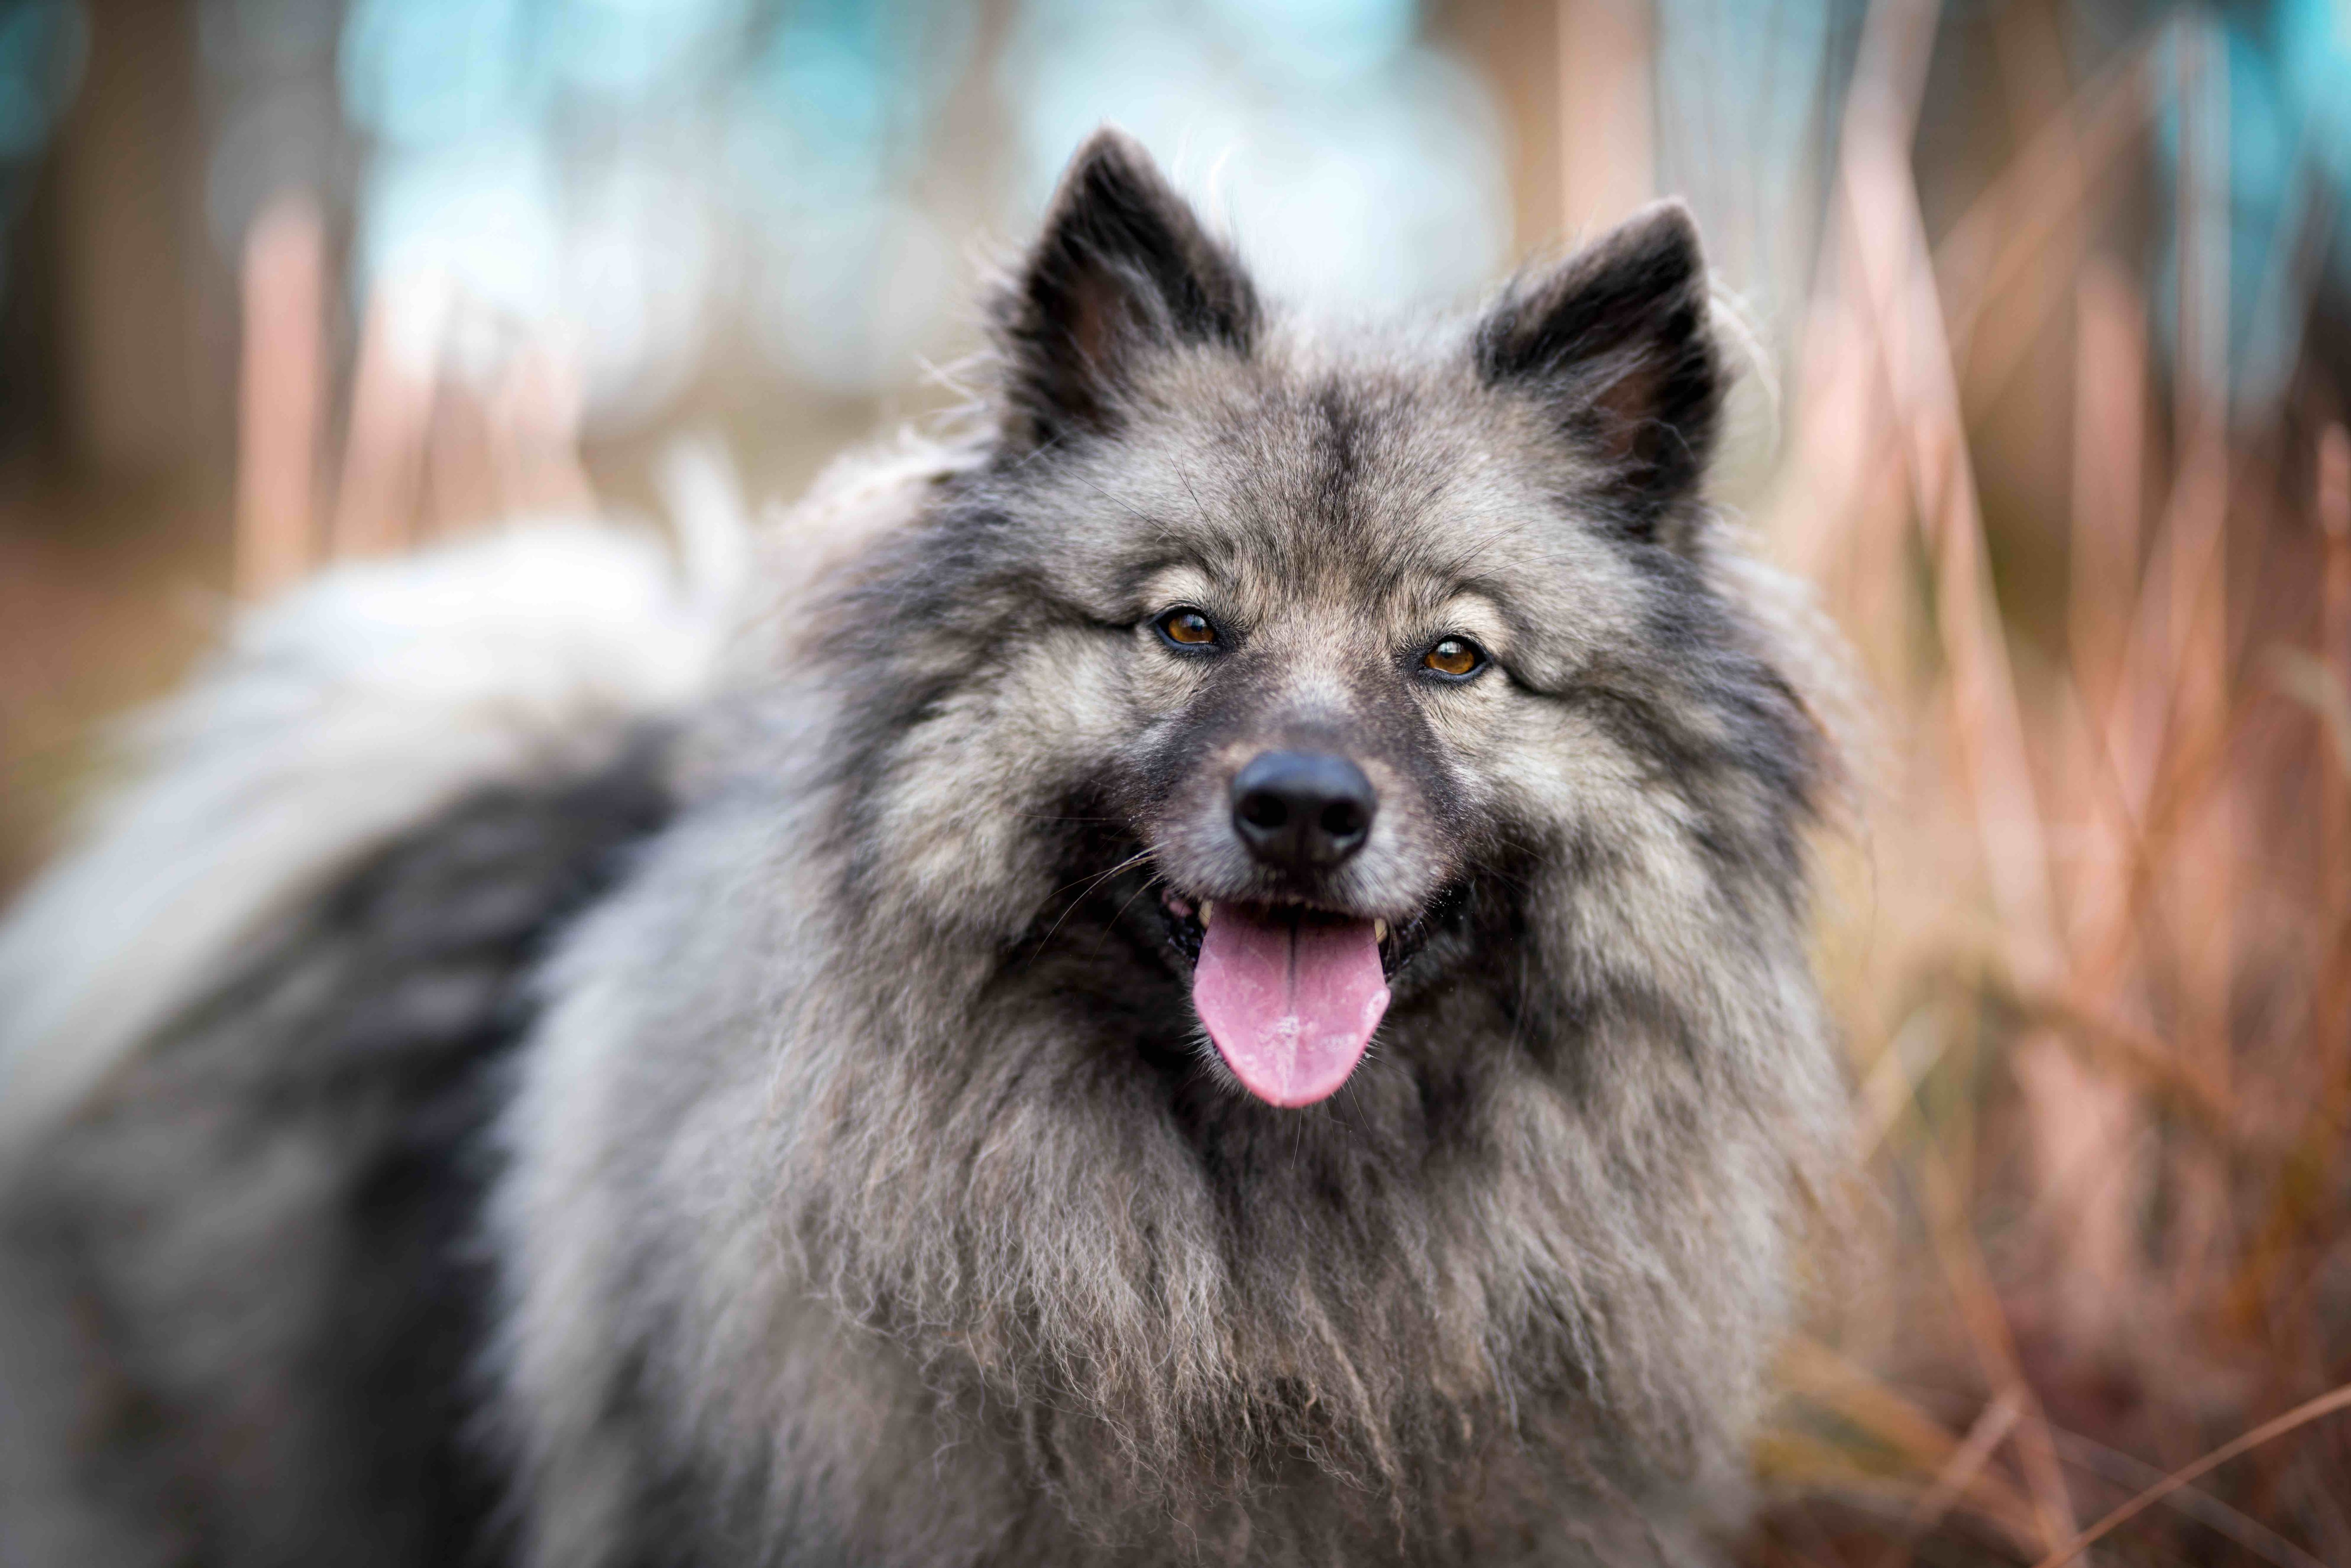 Closeup of a fluffy gray keeshond dog smiling